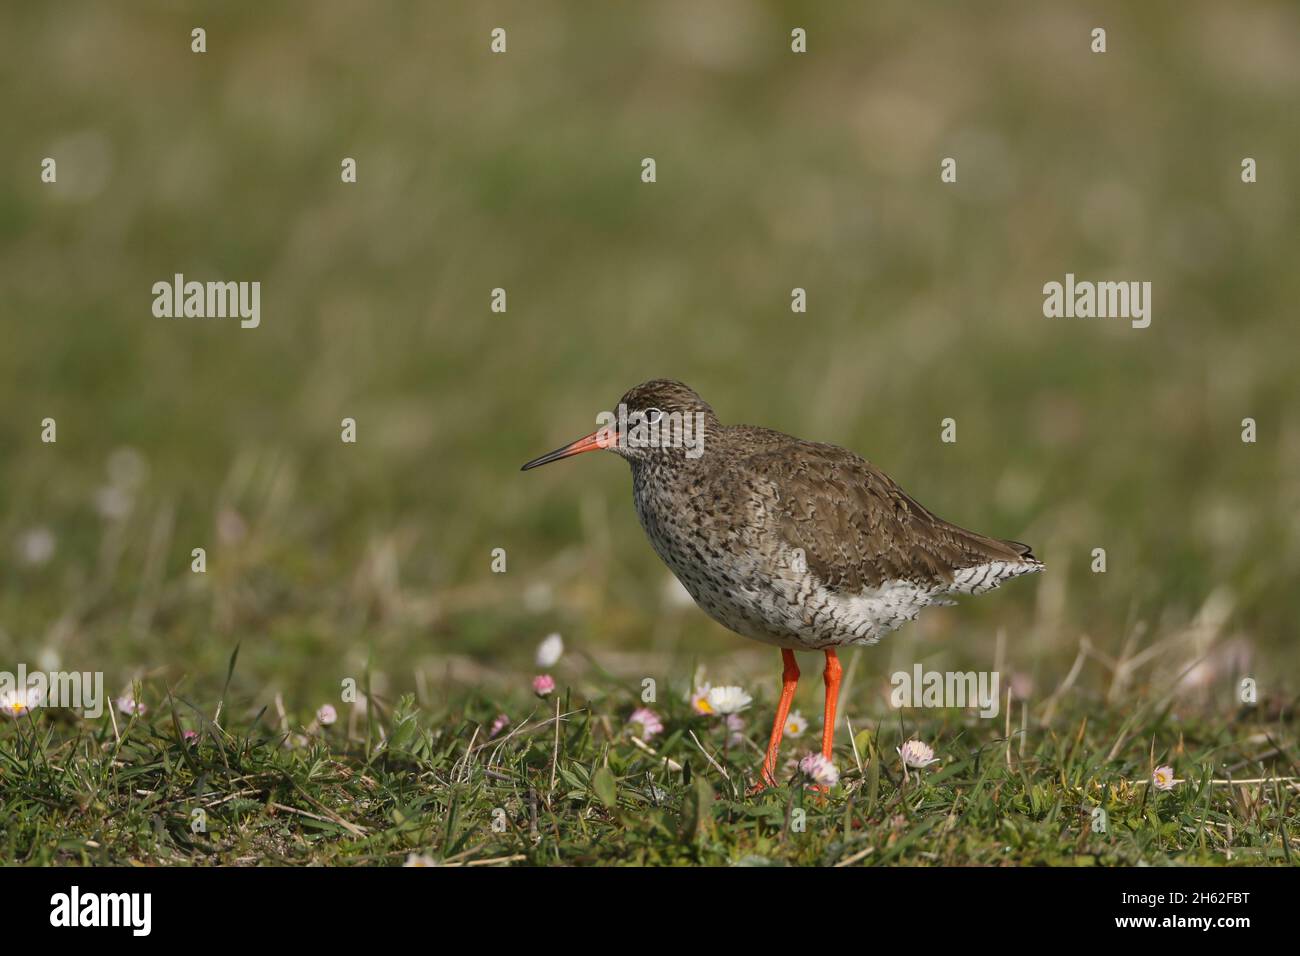 Redshank is a medium sized wader, common in the UK, obvious with red legs and long bill. Stock Photo